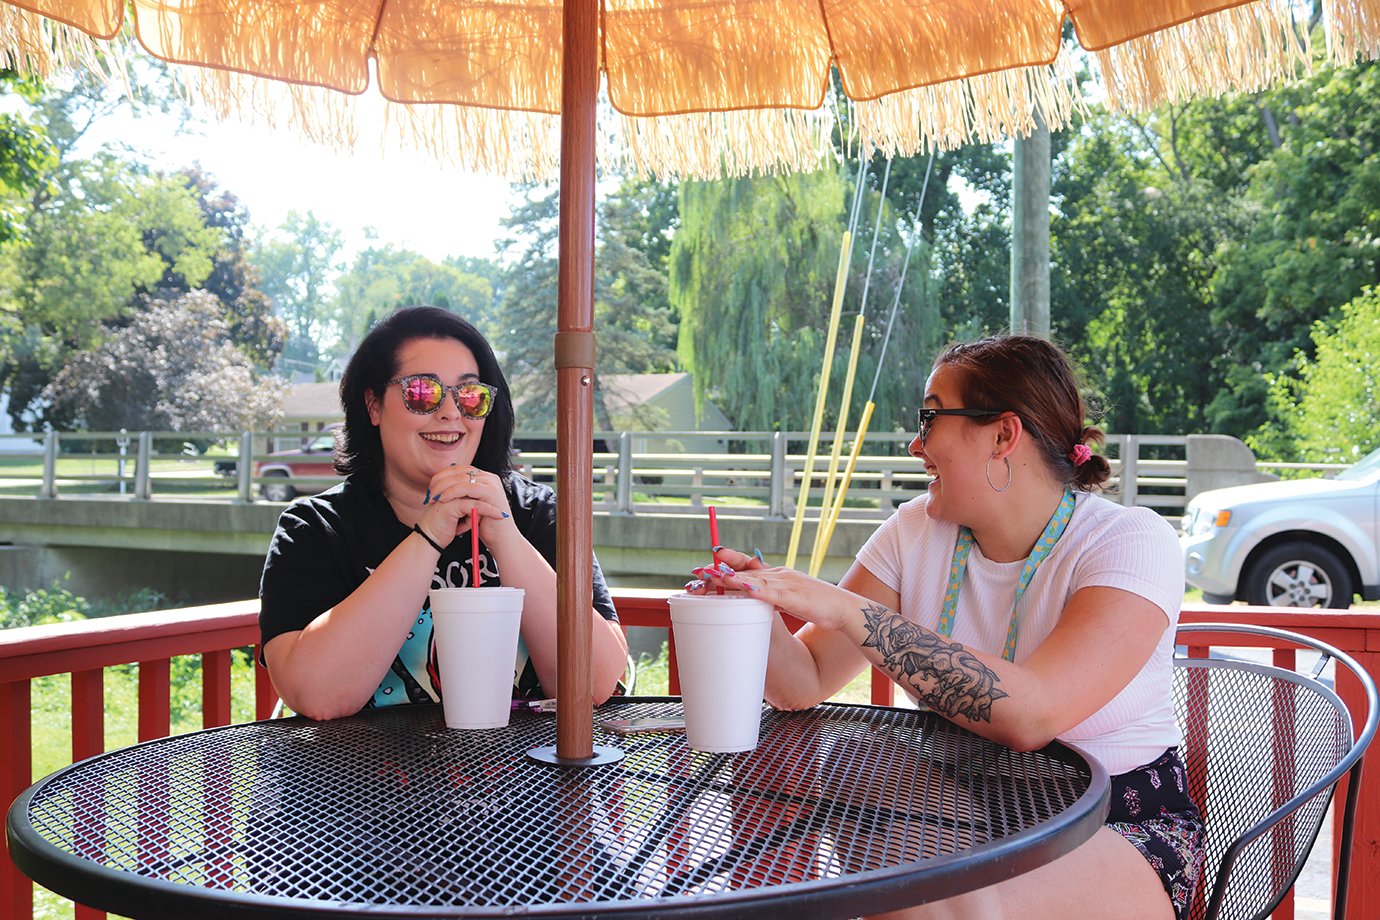 Brianna Melvin, left, and Haleah Maddox enjoy drinks in the shade Monday at The Big Dipper.